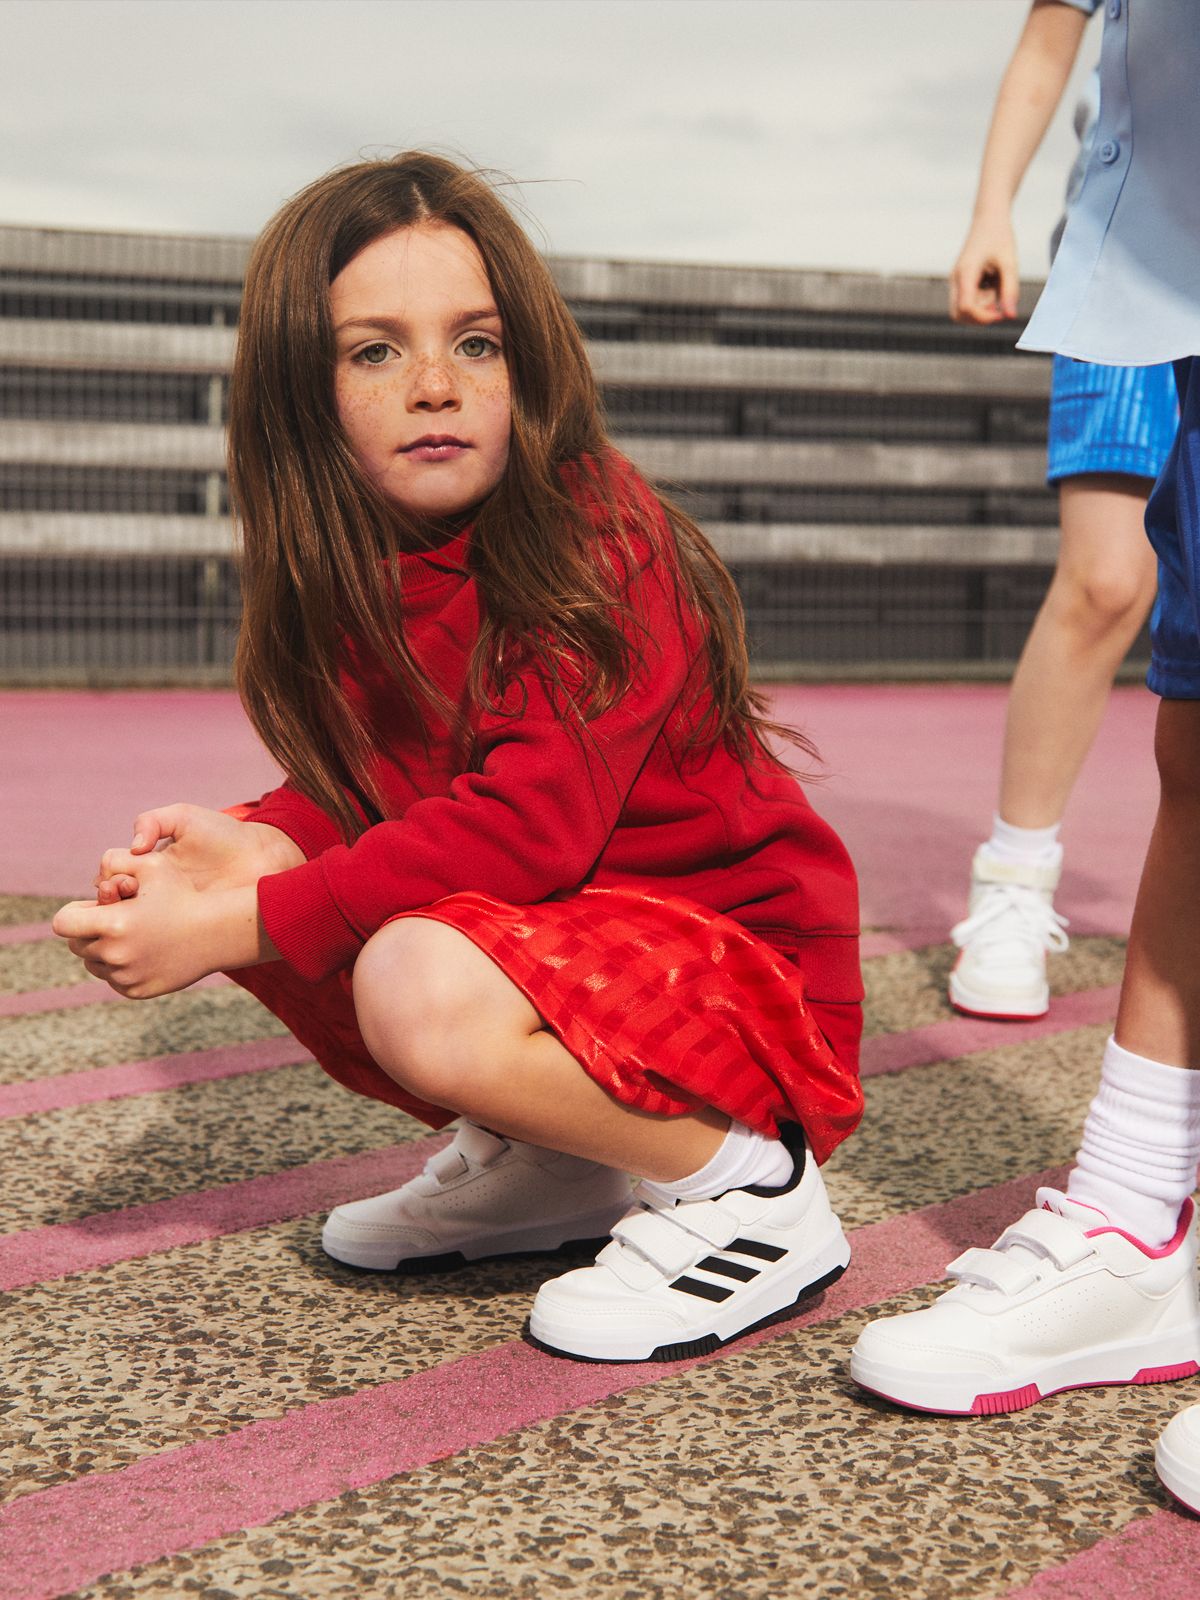 Image of a girl crouching down wearing red shorts and trainers